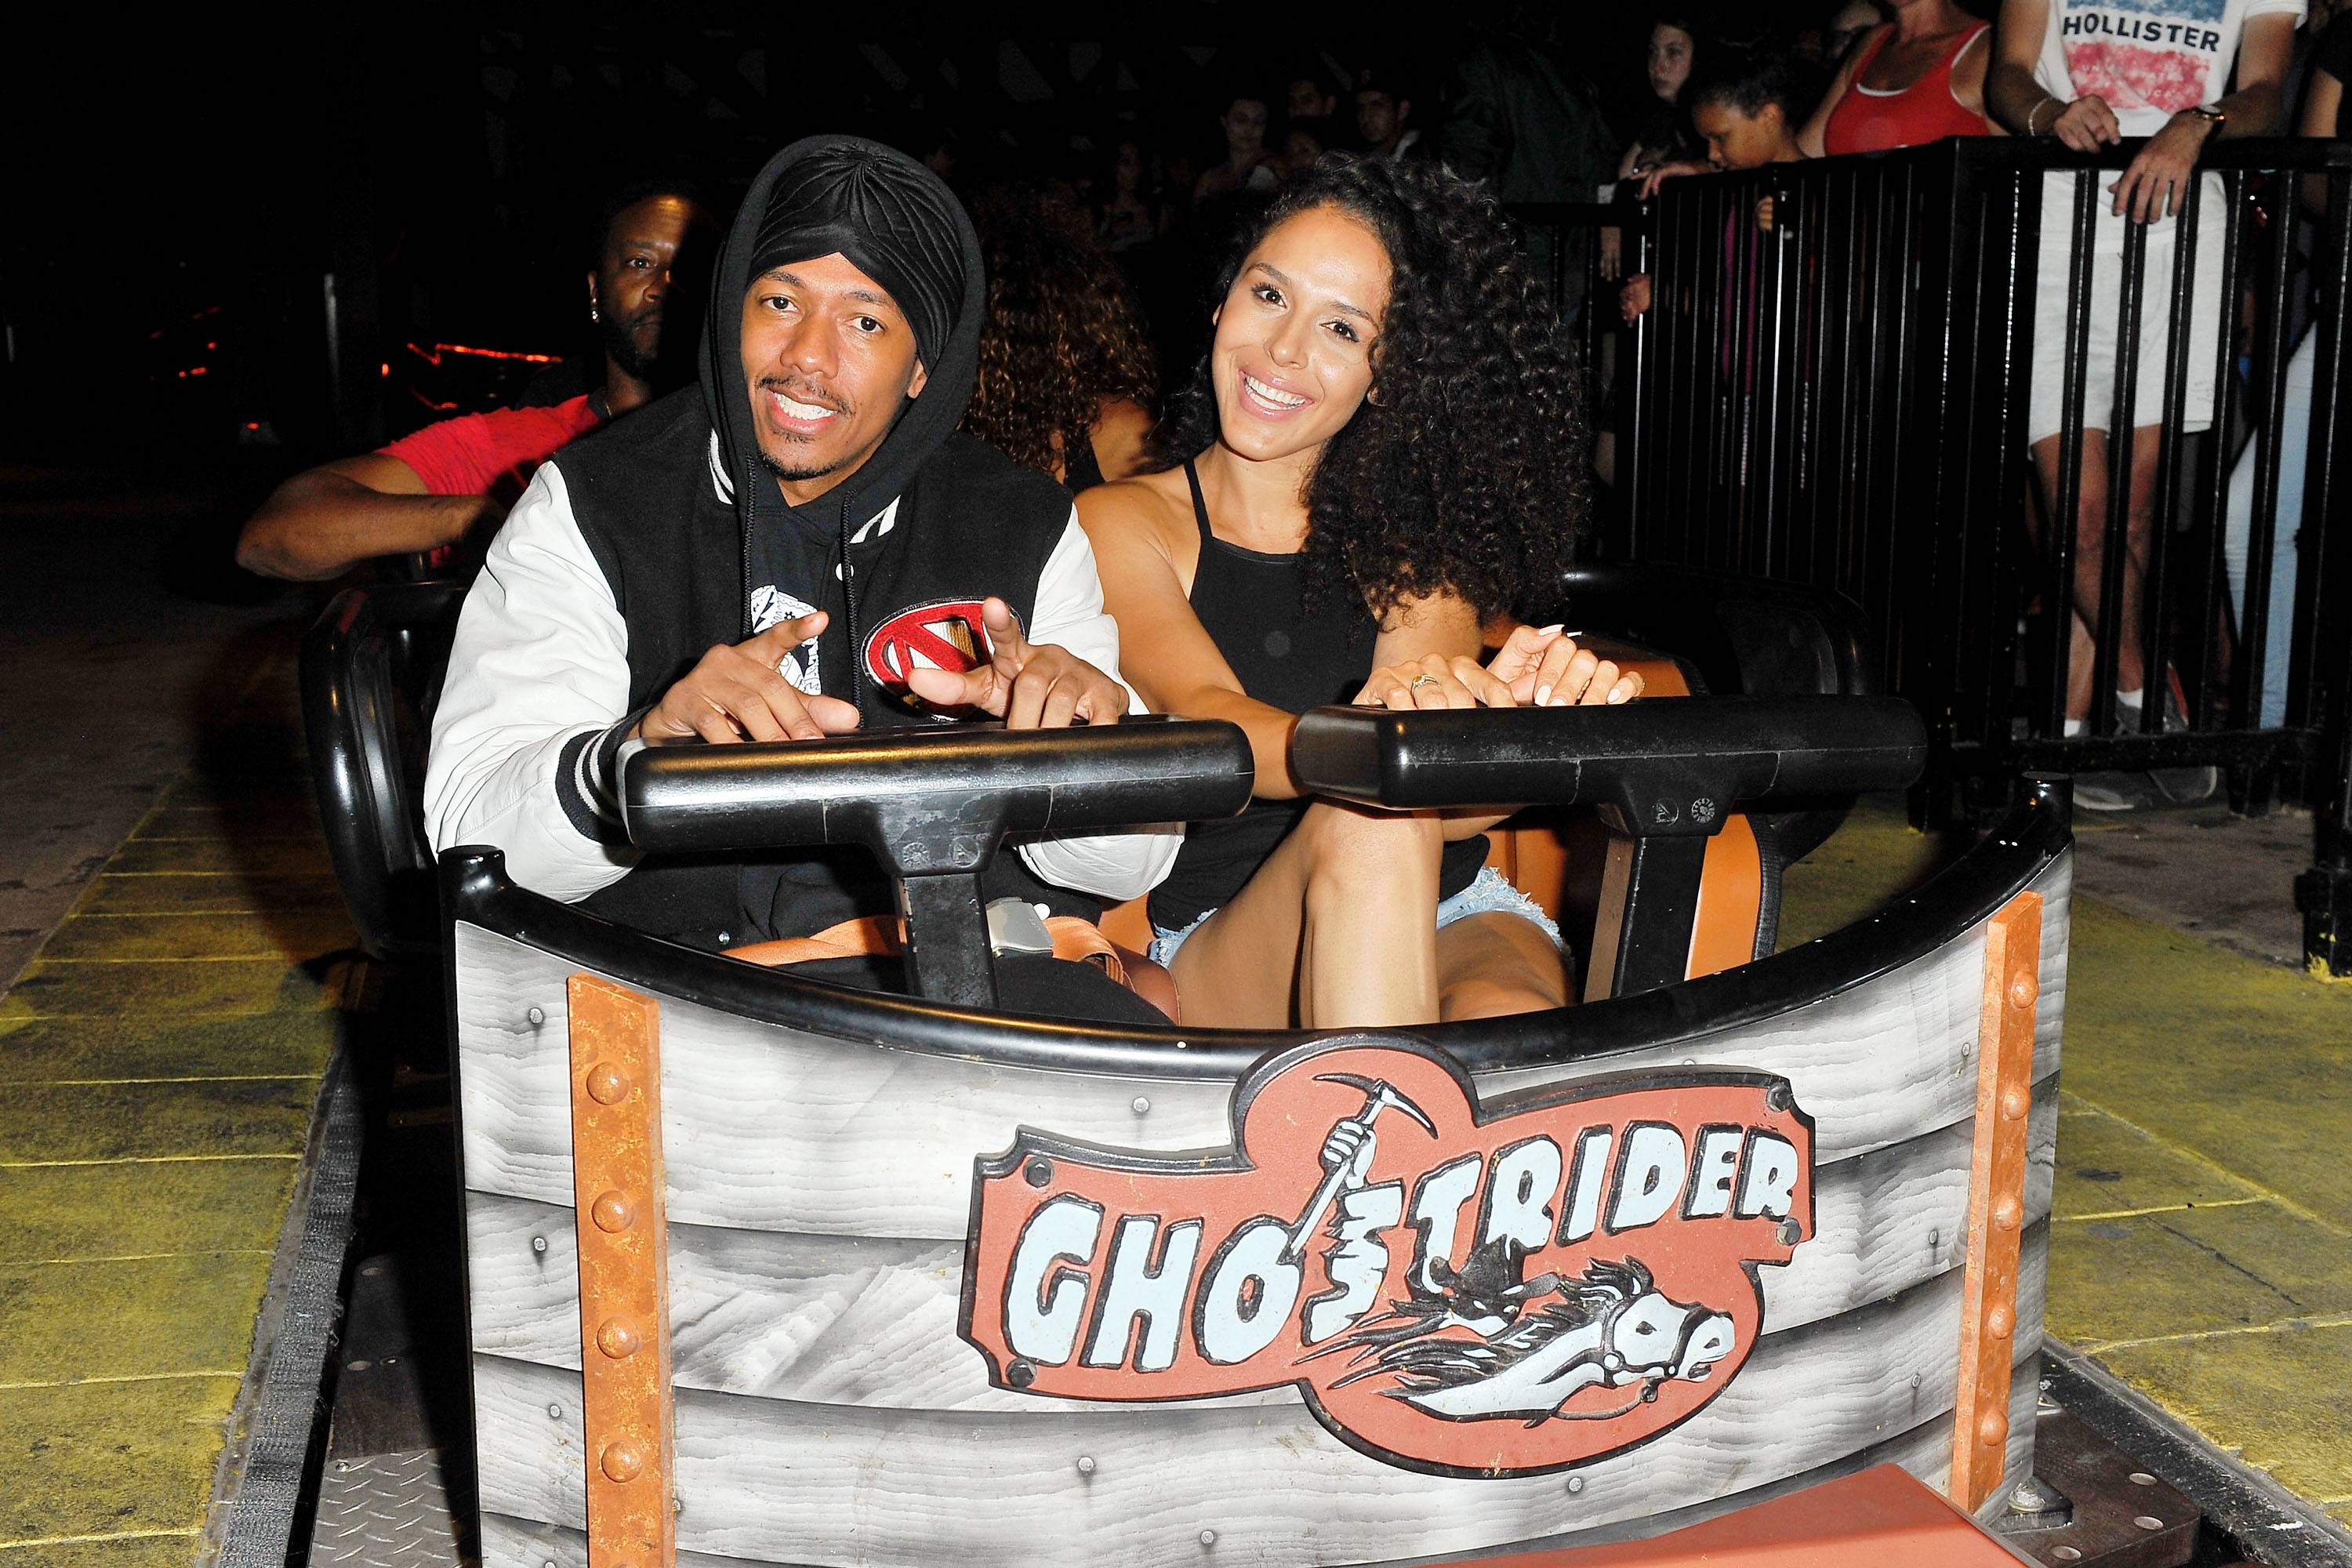 Actor Nick Cannon and Brittany Bell ride 'Ghostrider' at Knott's Berry Farm on September 1, 2017 in Buena Park, California.